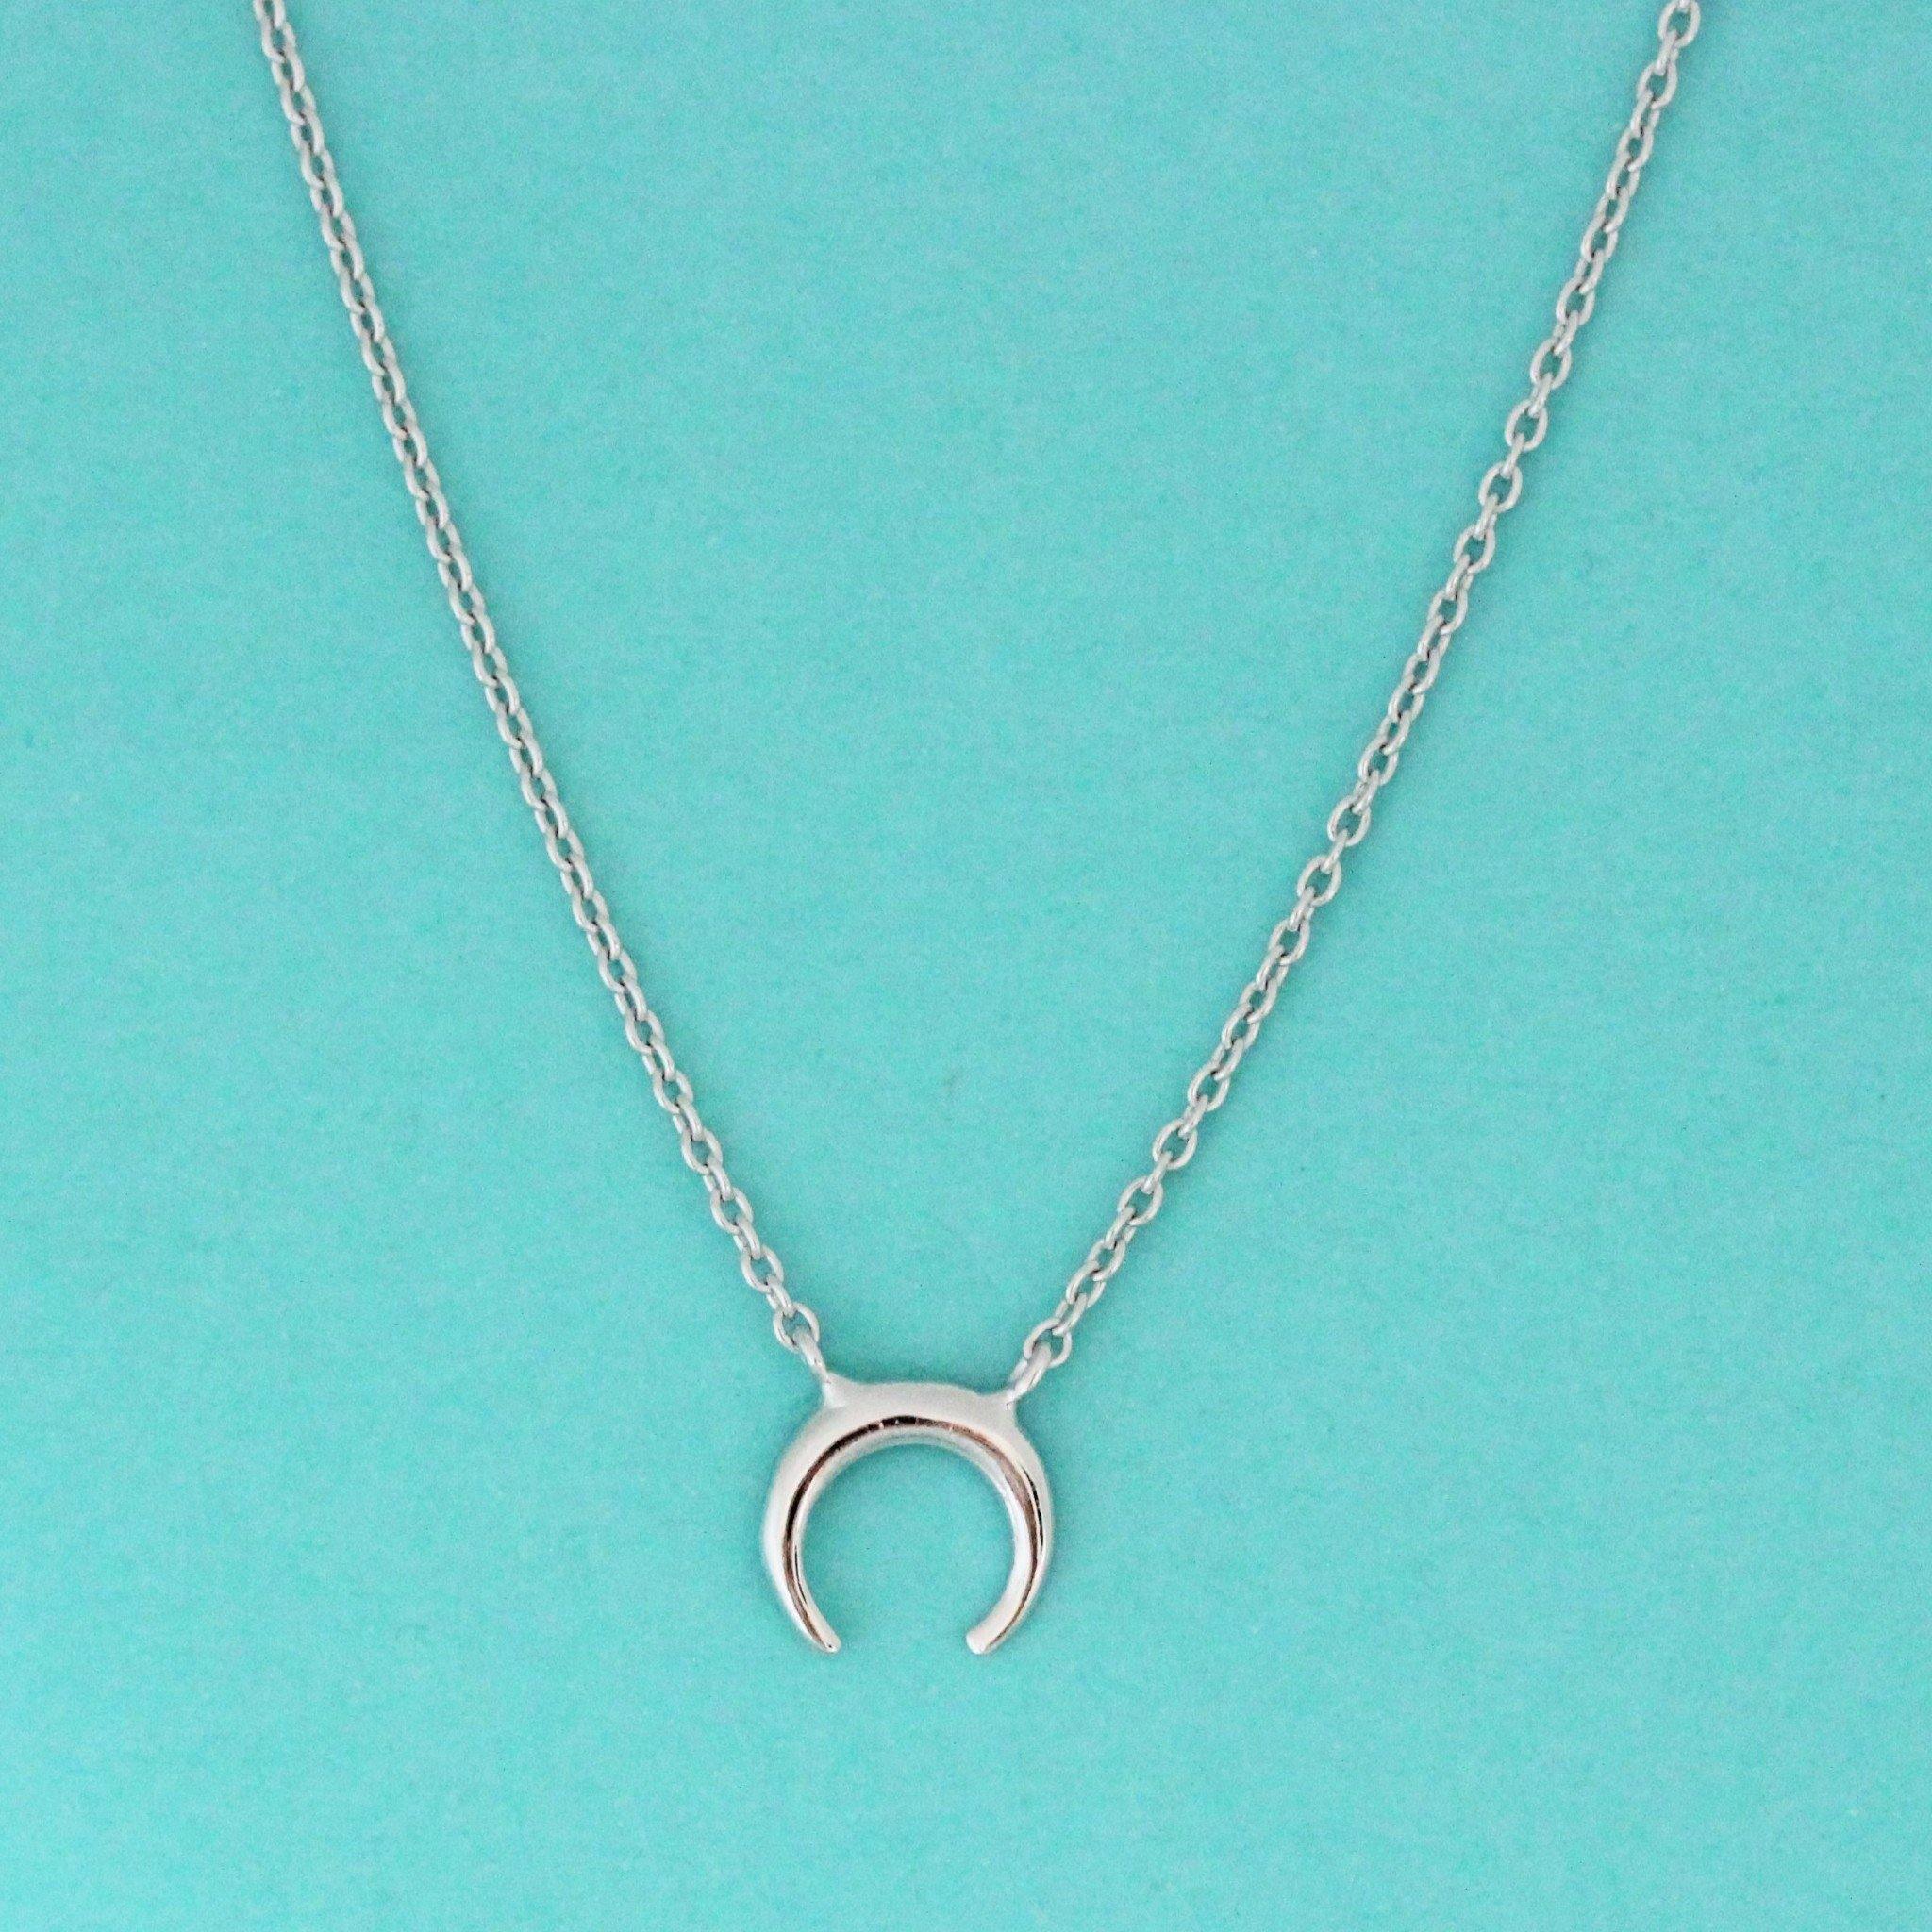 Sterling Silver Crescent Moon Horn Choker Necklace 36cm + Extension - STERLING SILVER DESIGNS